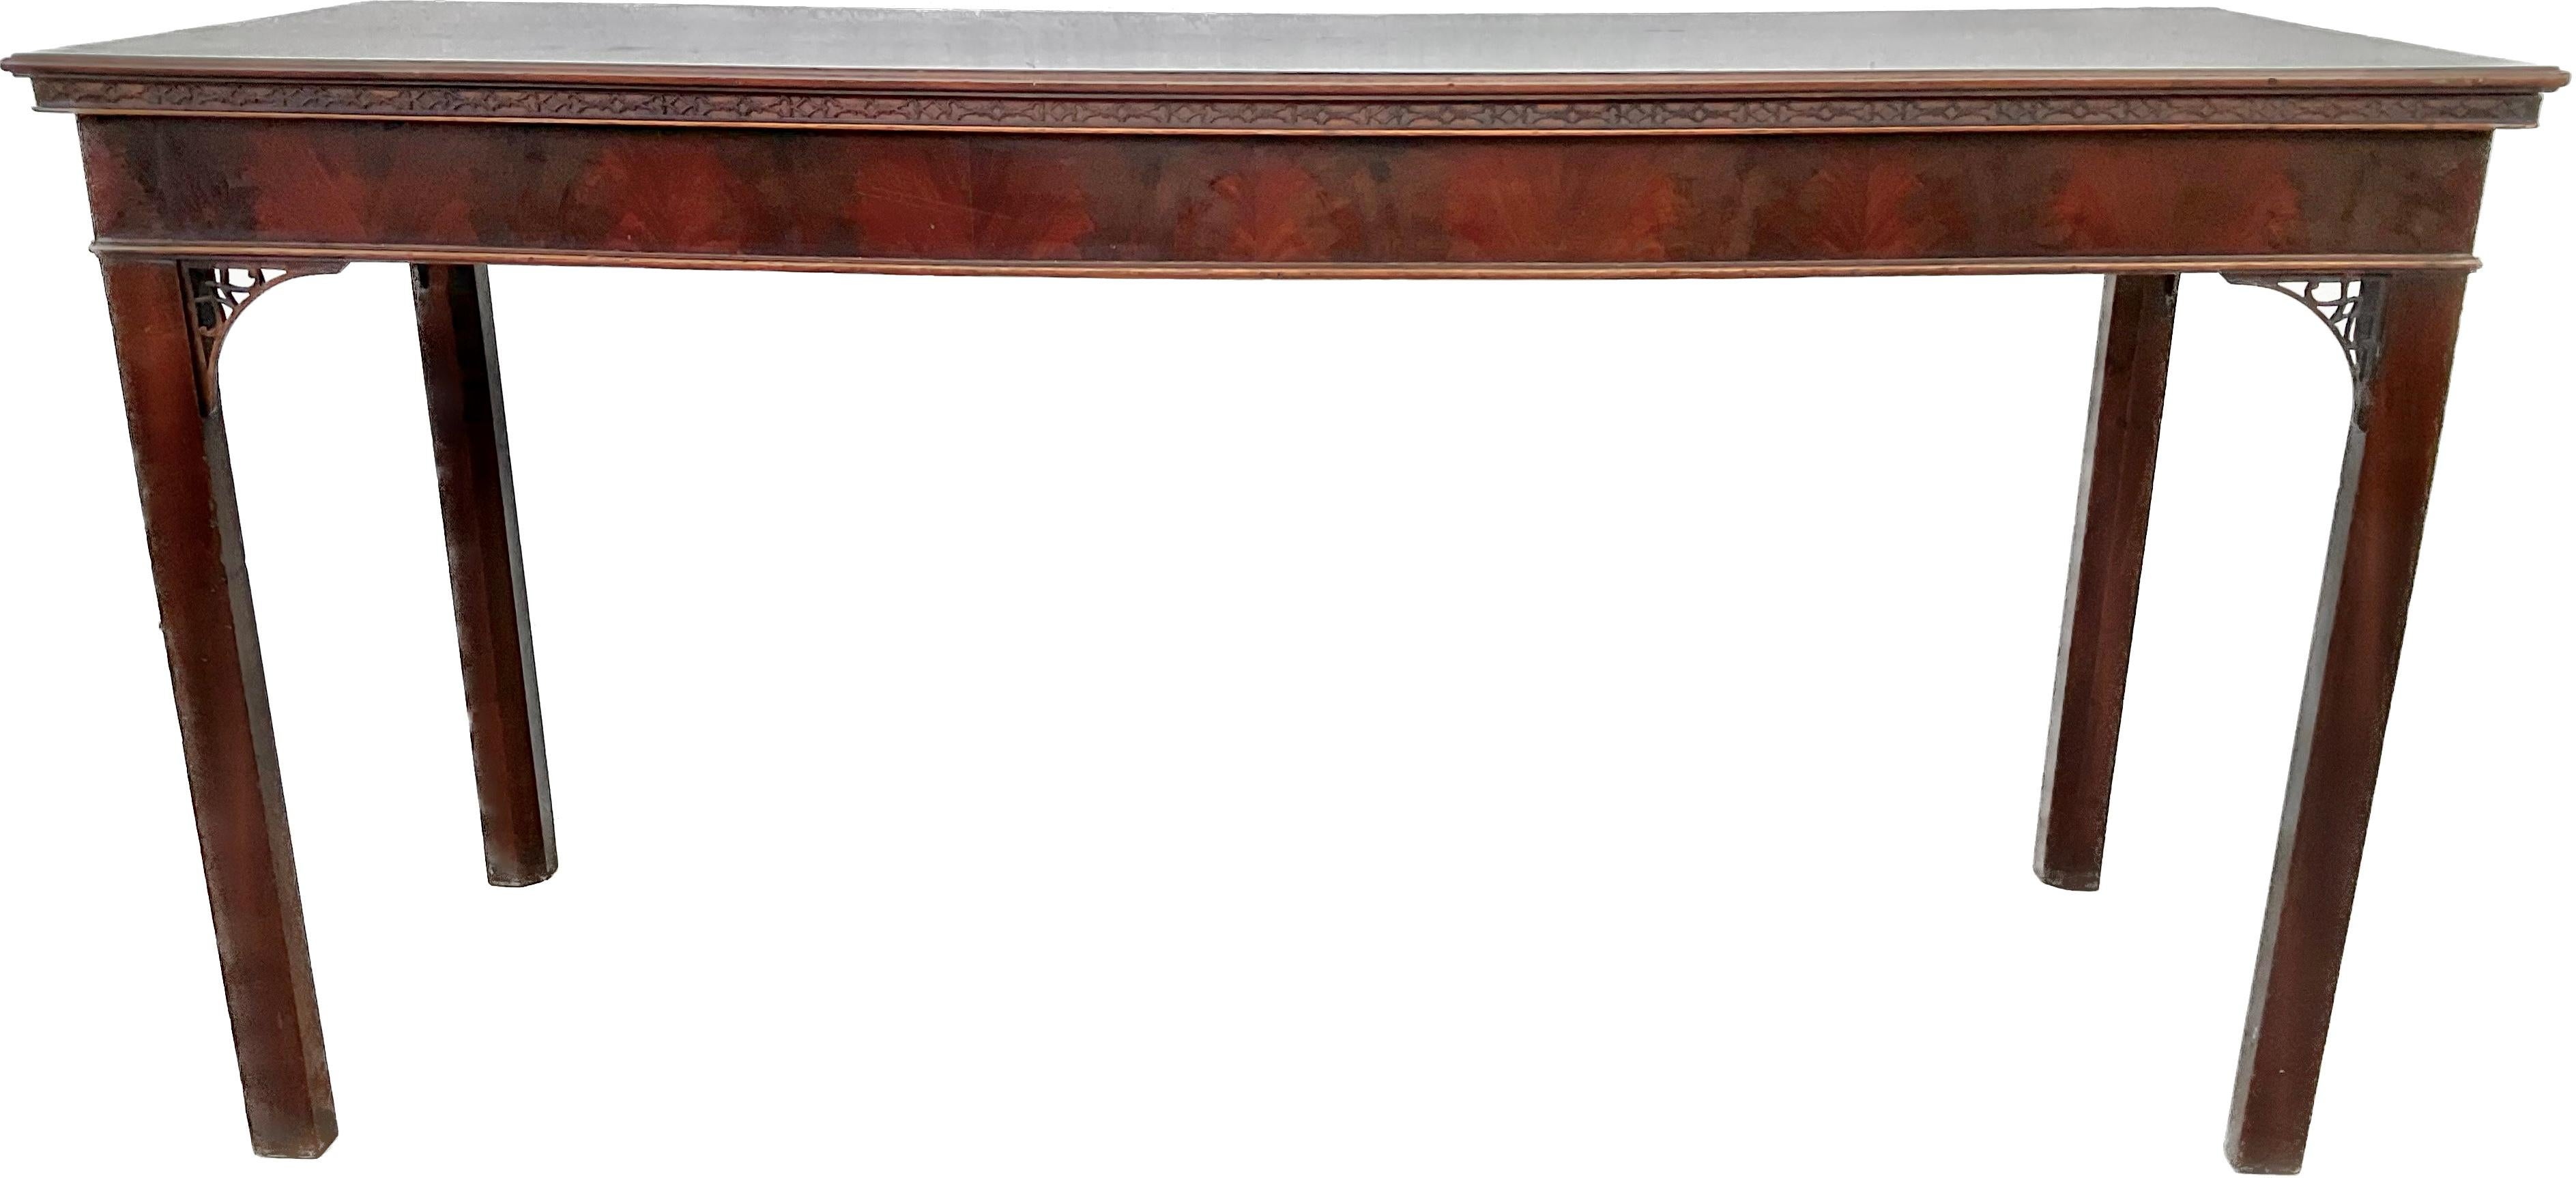 English Chinese Chippendale Mahogany Serving Table For Sale 5